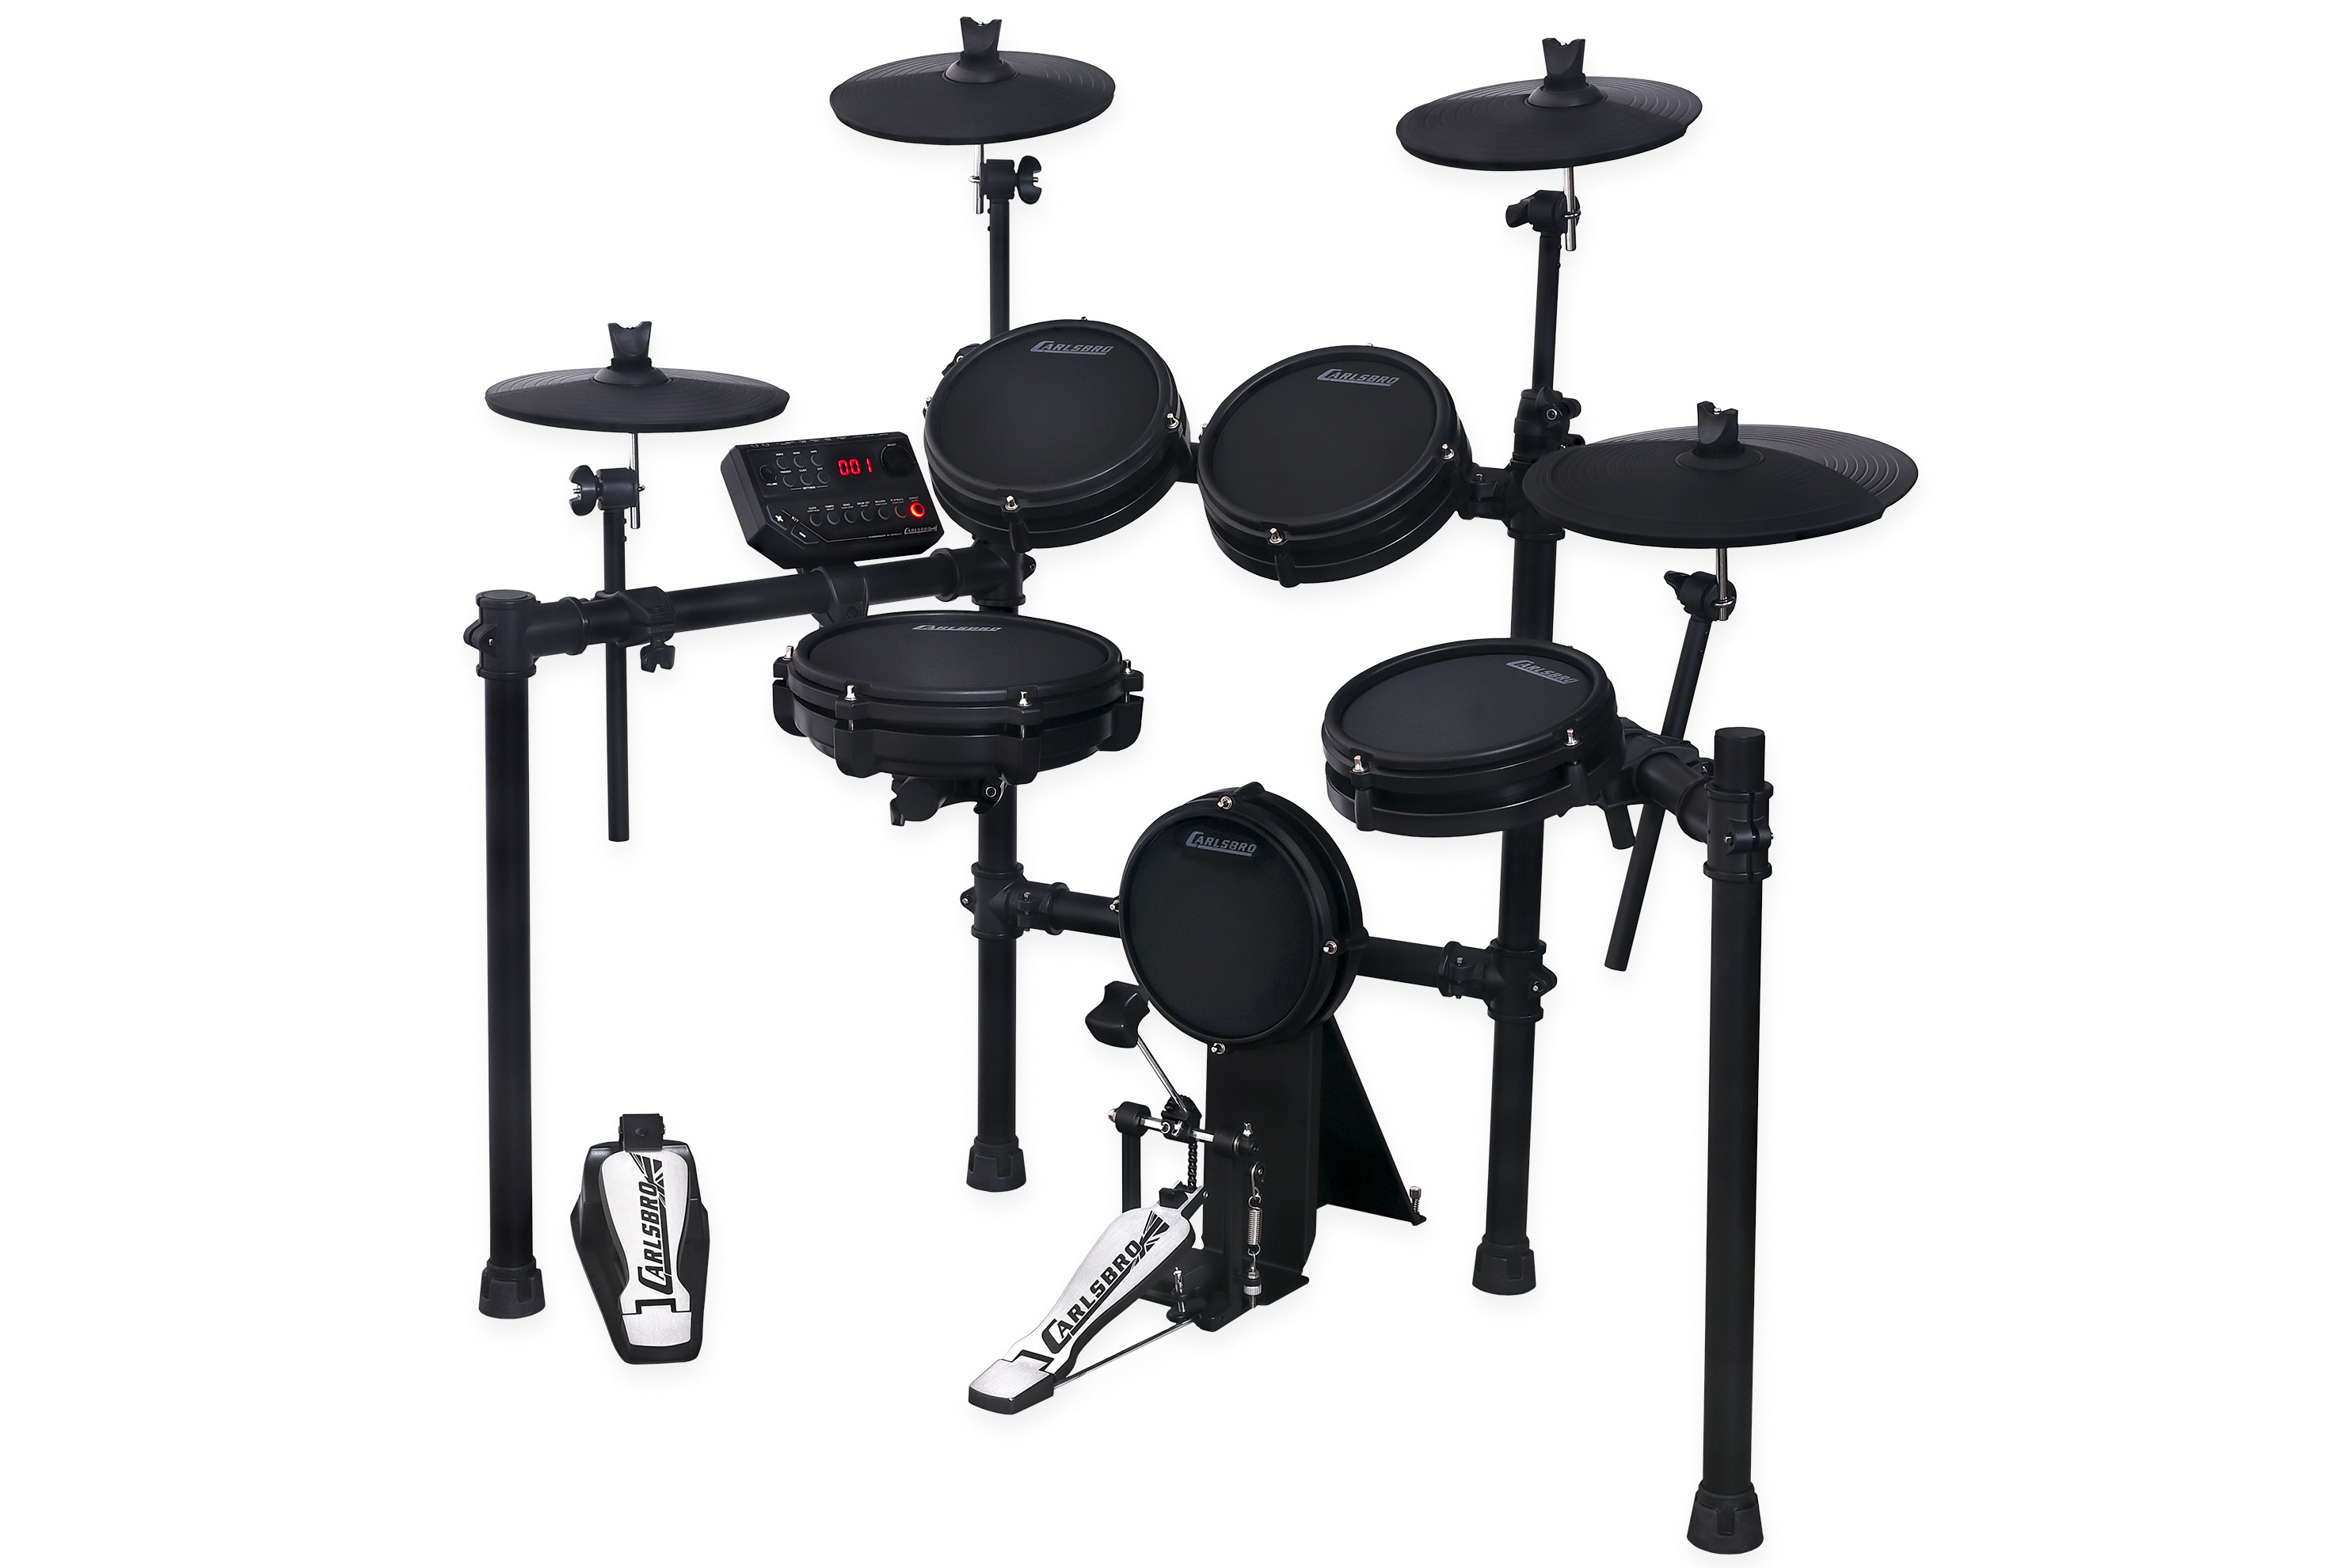 Carlsbro CSD35M electronic drum kit right side view